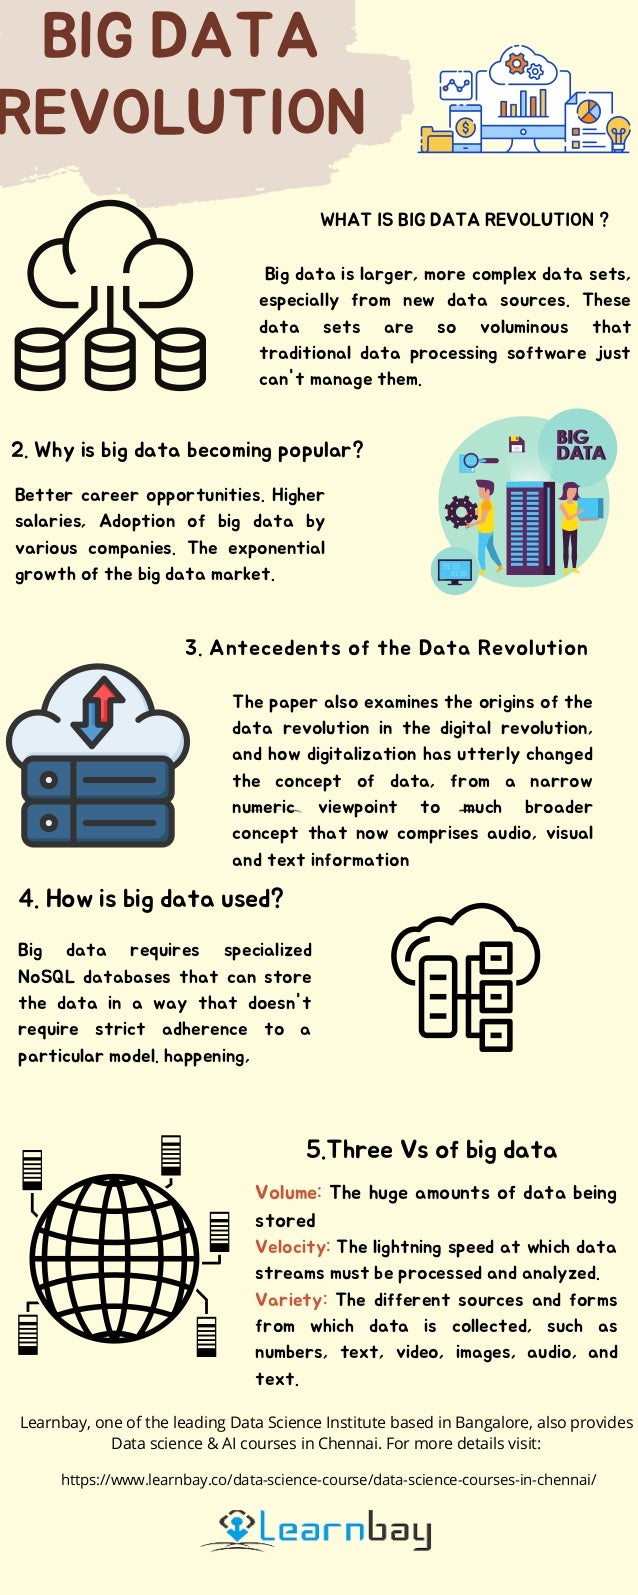 BIG DATA
REVOLUTION
WHAT IS BIG DATA REVOLUTION ?
Big data is larger, more complex data sets,
especially from new data sources. These
data sets are so voluminous that
traditional data processing software just
can't manage them.
2. Why is big data becoming popular?
Better career opportunities. Higher
salaries, Adoption of big data by
various companies. The exponential
growth of the big data market.
3. Antecedents of the Data Revolution
The paper also examines the origins of the
data revolution in the digital revolution,
and how digitalization has utterly changed
the concept of data, from a narrow
numeric viewpoint to much broader
concept that now comprises audio, visual
and text information
4. How is big data used?
Big data requires specialized
NoSQL databases that can store
the data in a way that doesn't
require strict adherence to a
particular model. happening,
5.Three Vs of big data
Volume: The huge amounts of data being
stored
Velocity: The lightning speed at which data
streams must be processed and analyzed.
Variety: The different sources and forms
from which data is collected, such as
numbers, text, video, images, audio, and
text.
https://www.learnbay.co/data-science-course/data-science-courses-in-chennai/
Learnbay, one of the leading Data Science Institute based in Bangalore, also provides
Data science & AI courses in Chennai. For more details visit:
 